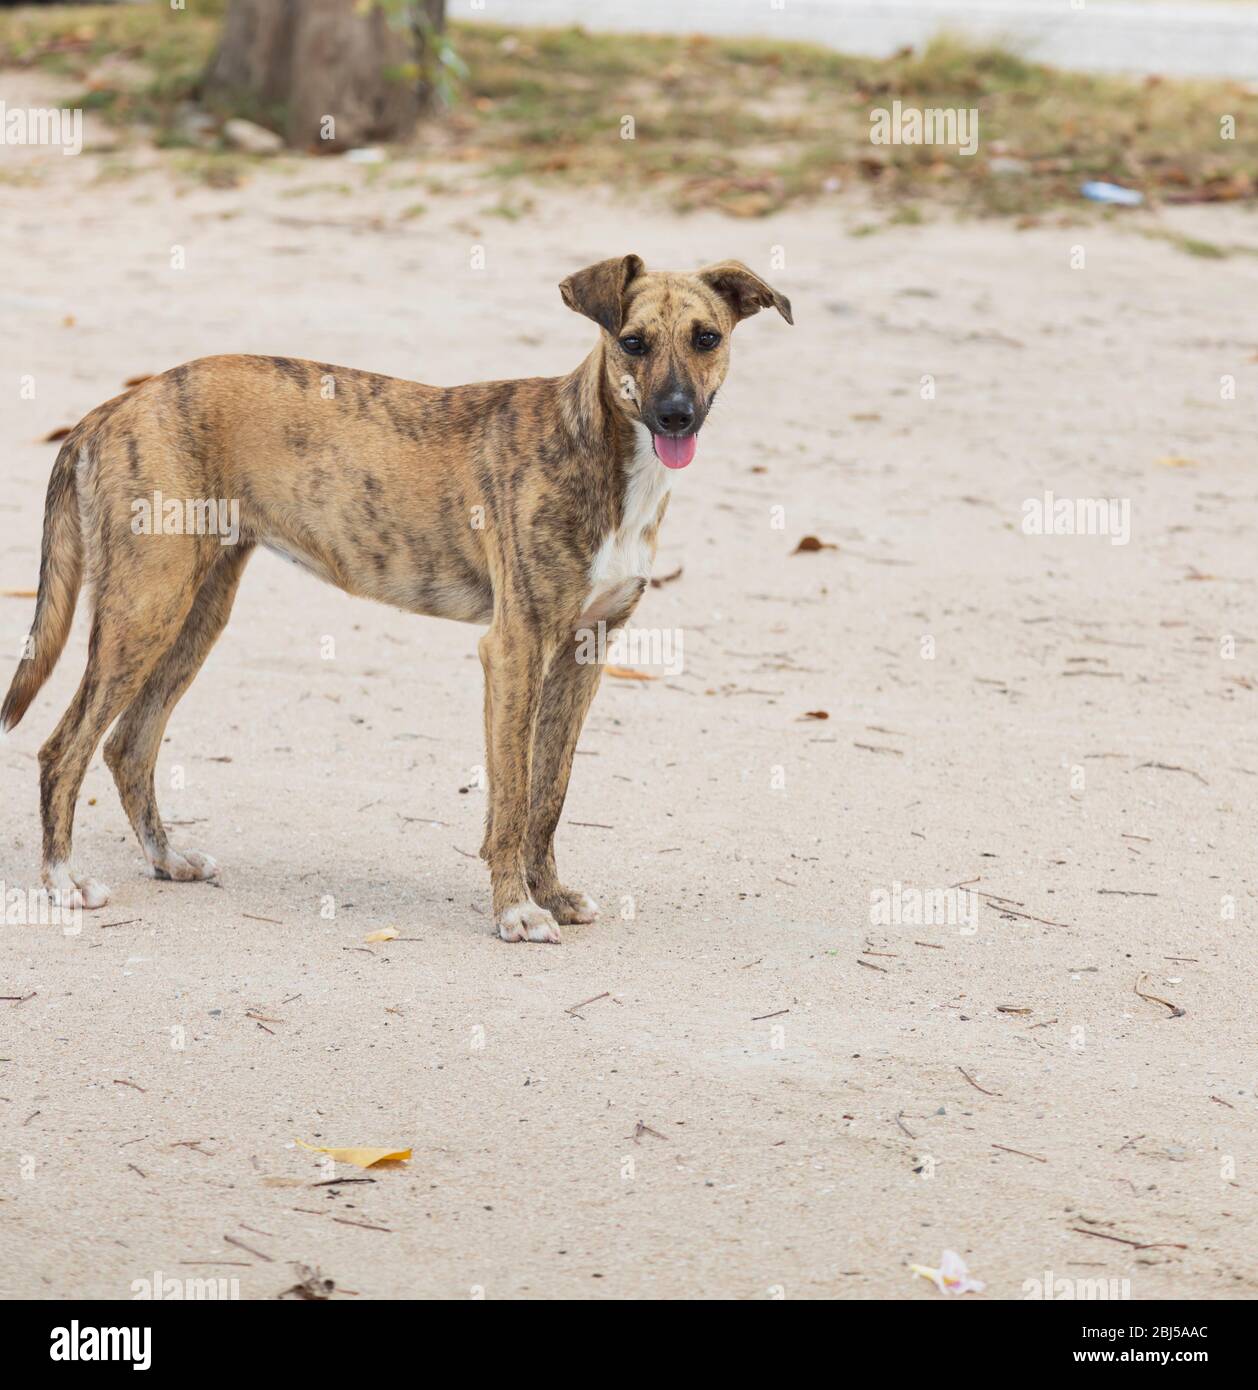 friendly cute brown dog standing still on the beach Stock Photo